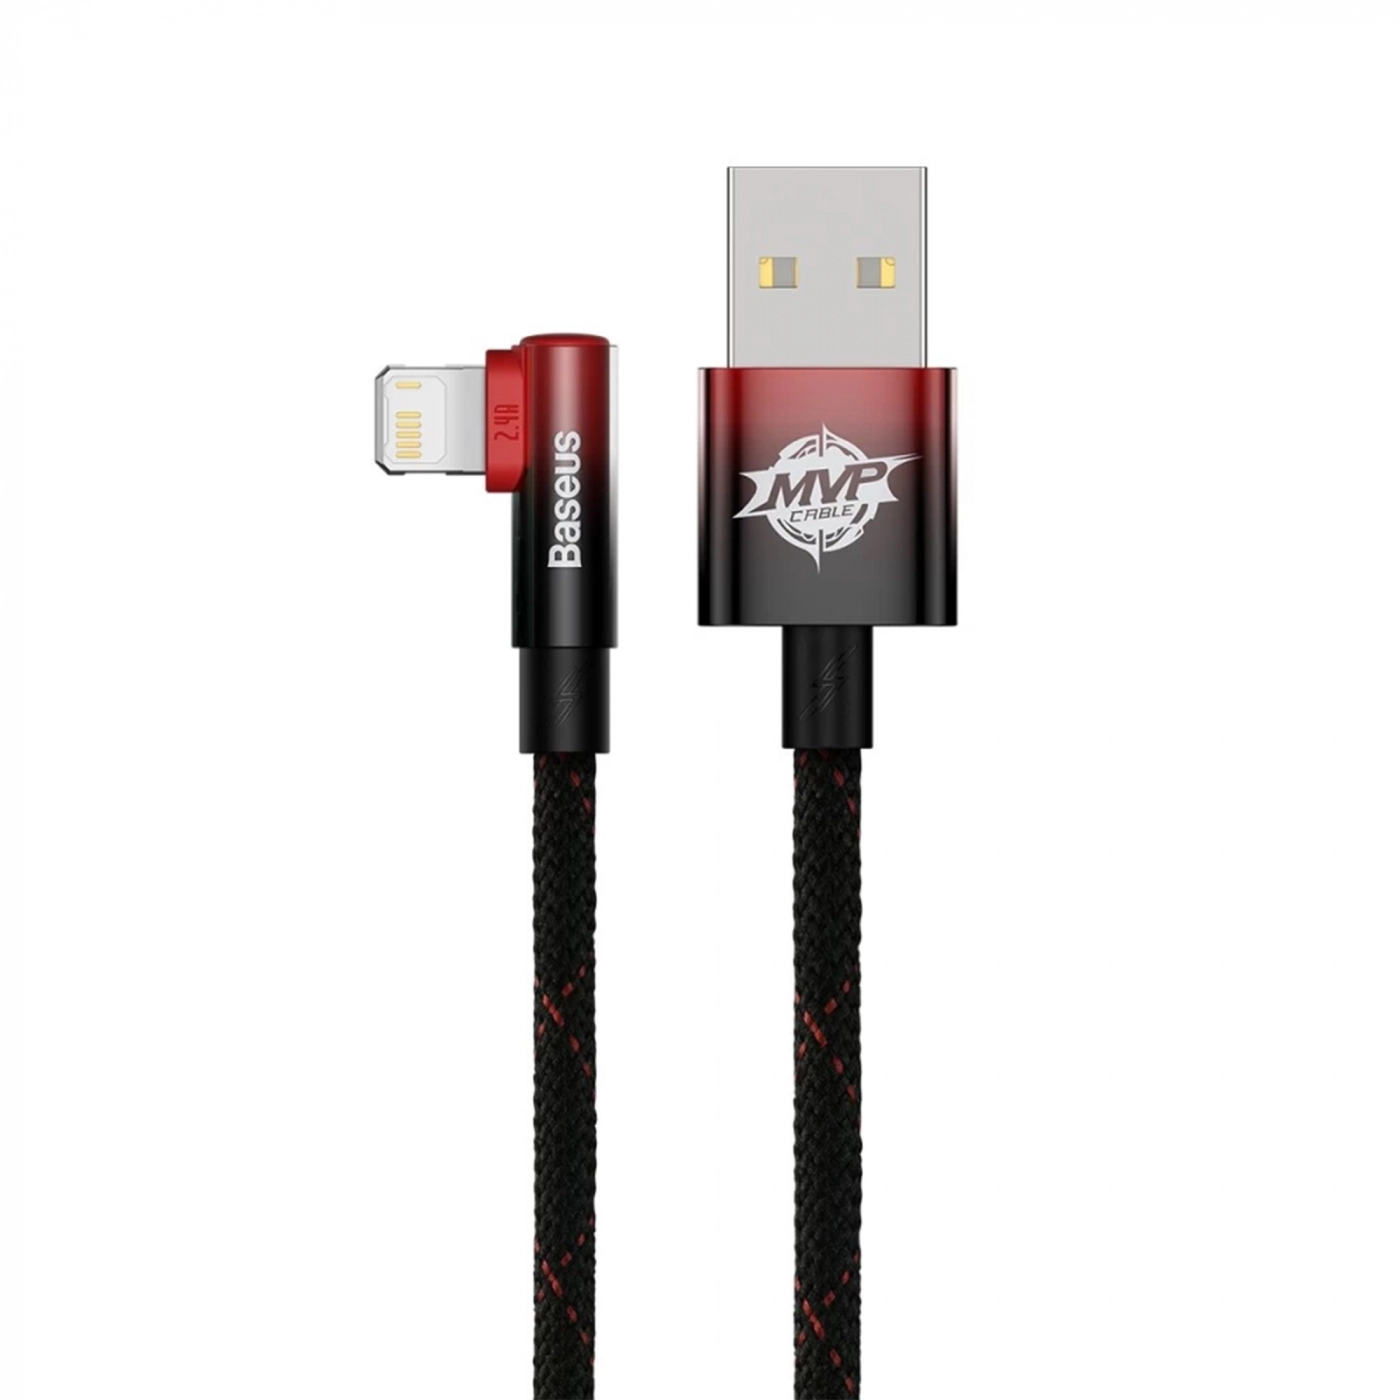 Купити Кабель Baseus MVP 2 Elbow-shaped Fast Charging Data Cable USB to iP 2.4A 2m Black|Red - фото 1